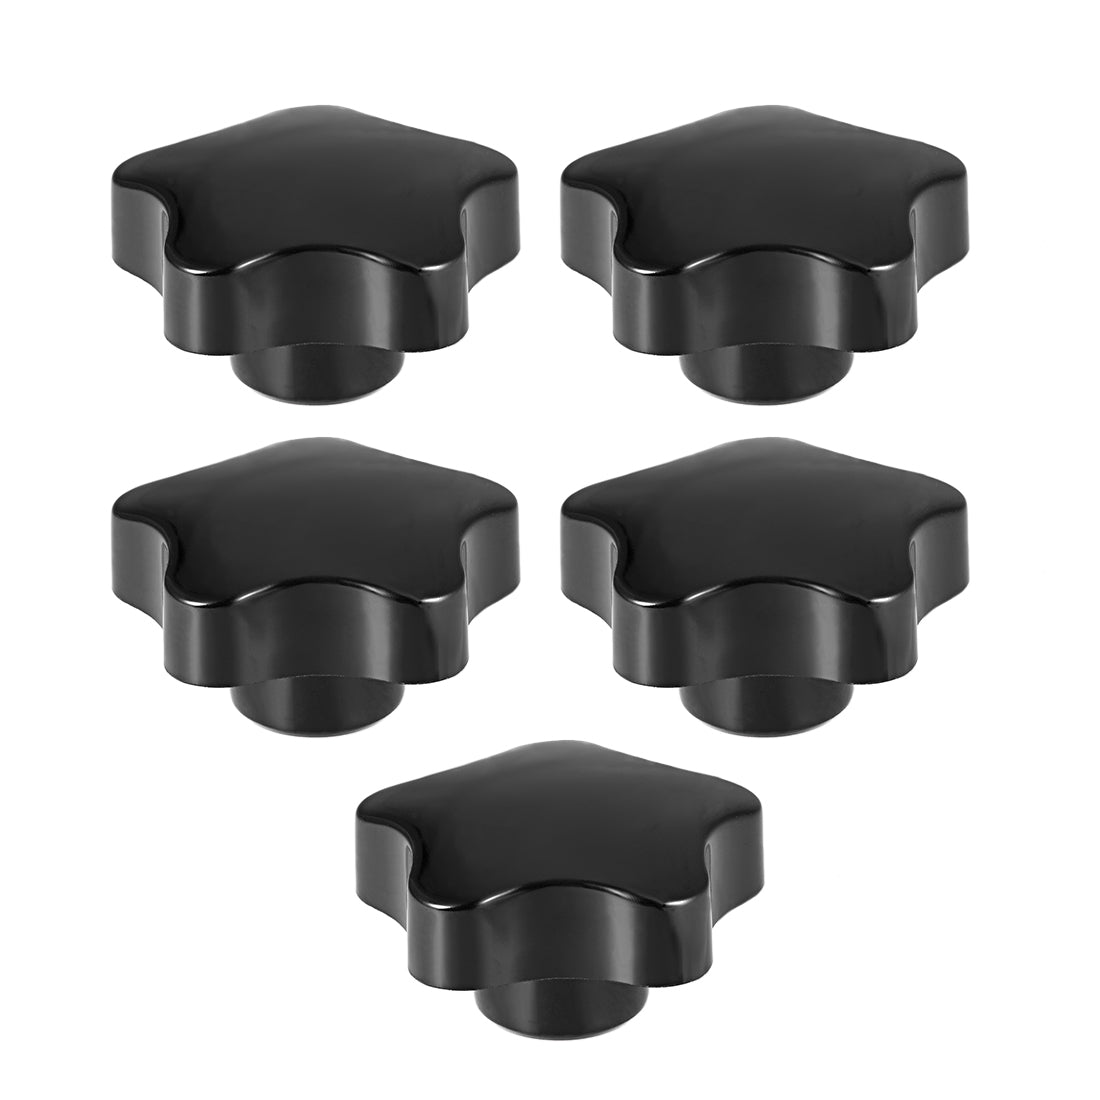 uxcell Uxcell Star Knobs Grip Handle Brass Insert Female Thread Set of 5 Black